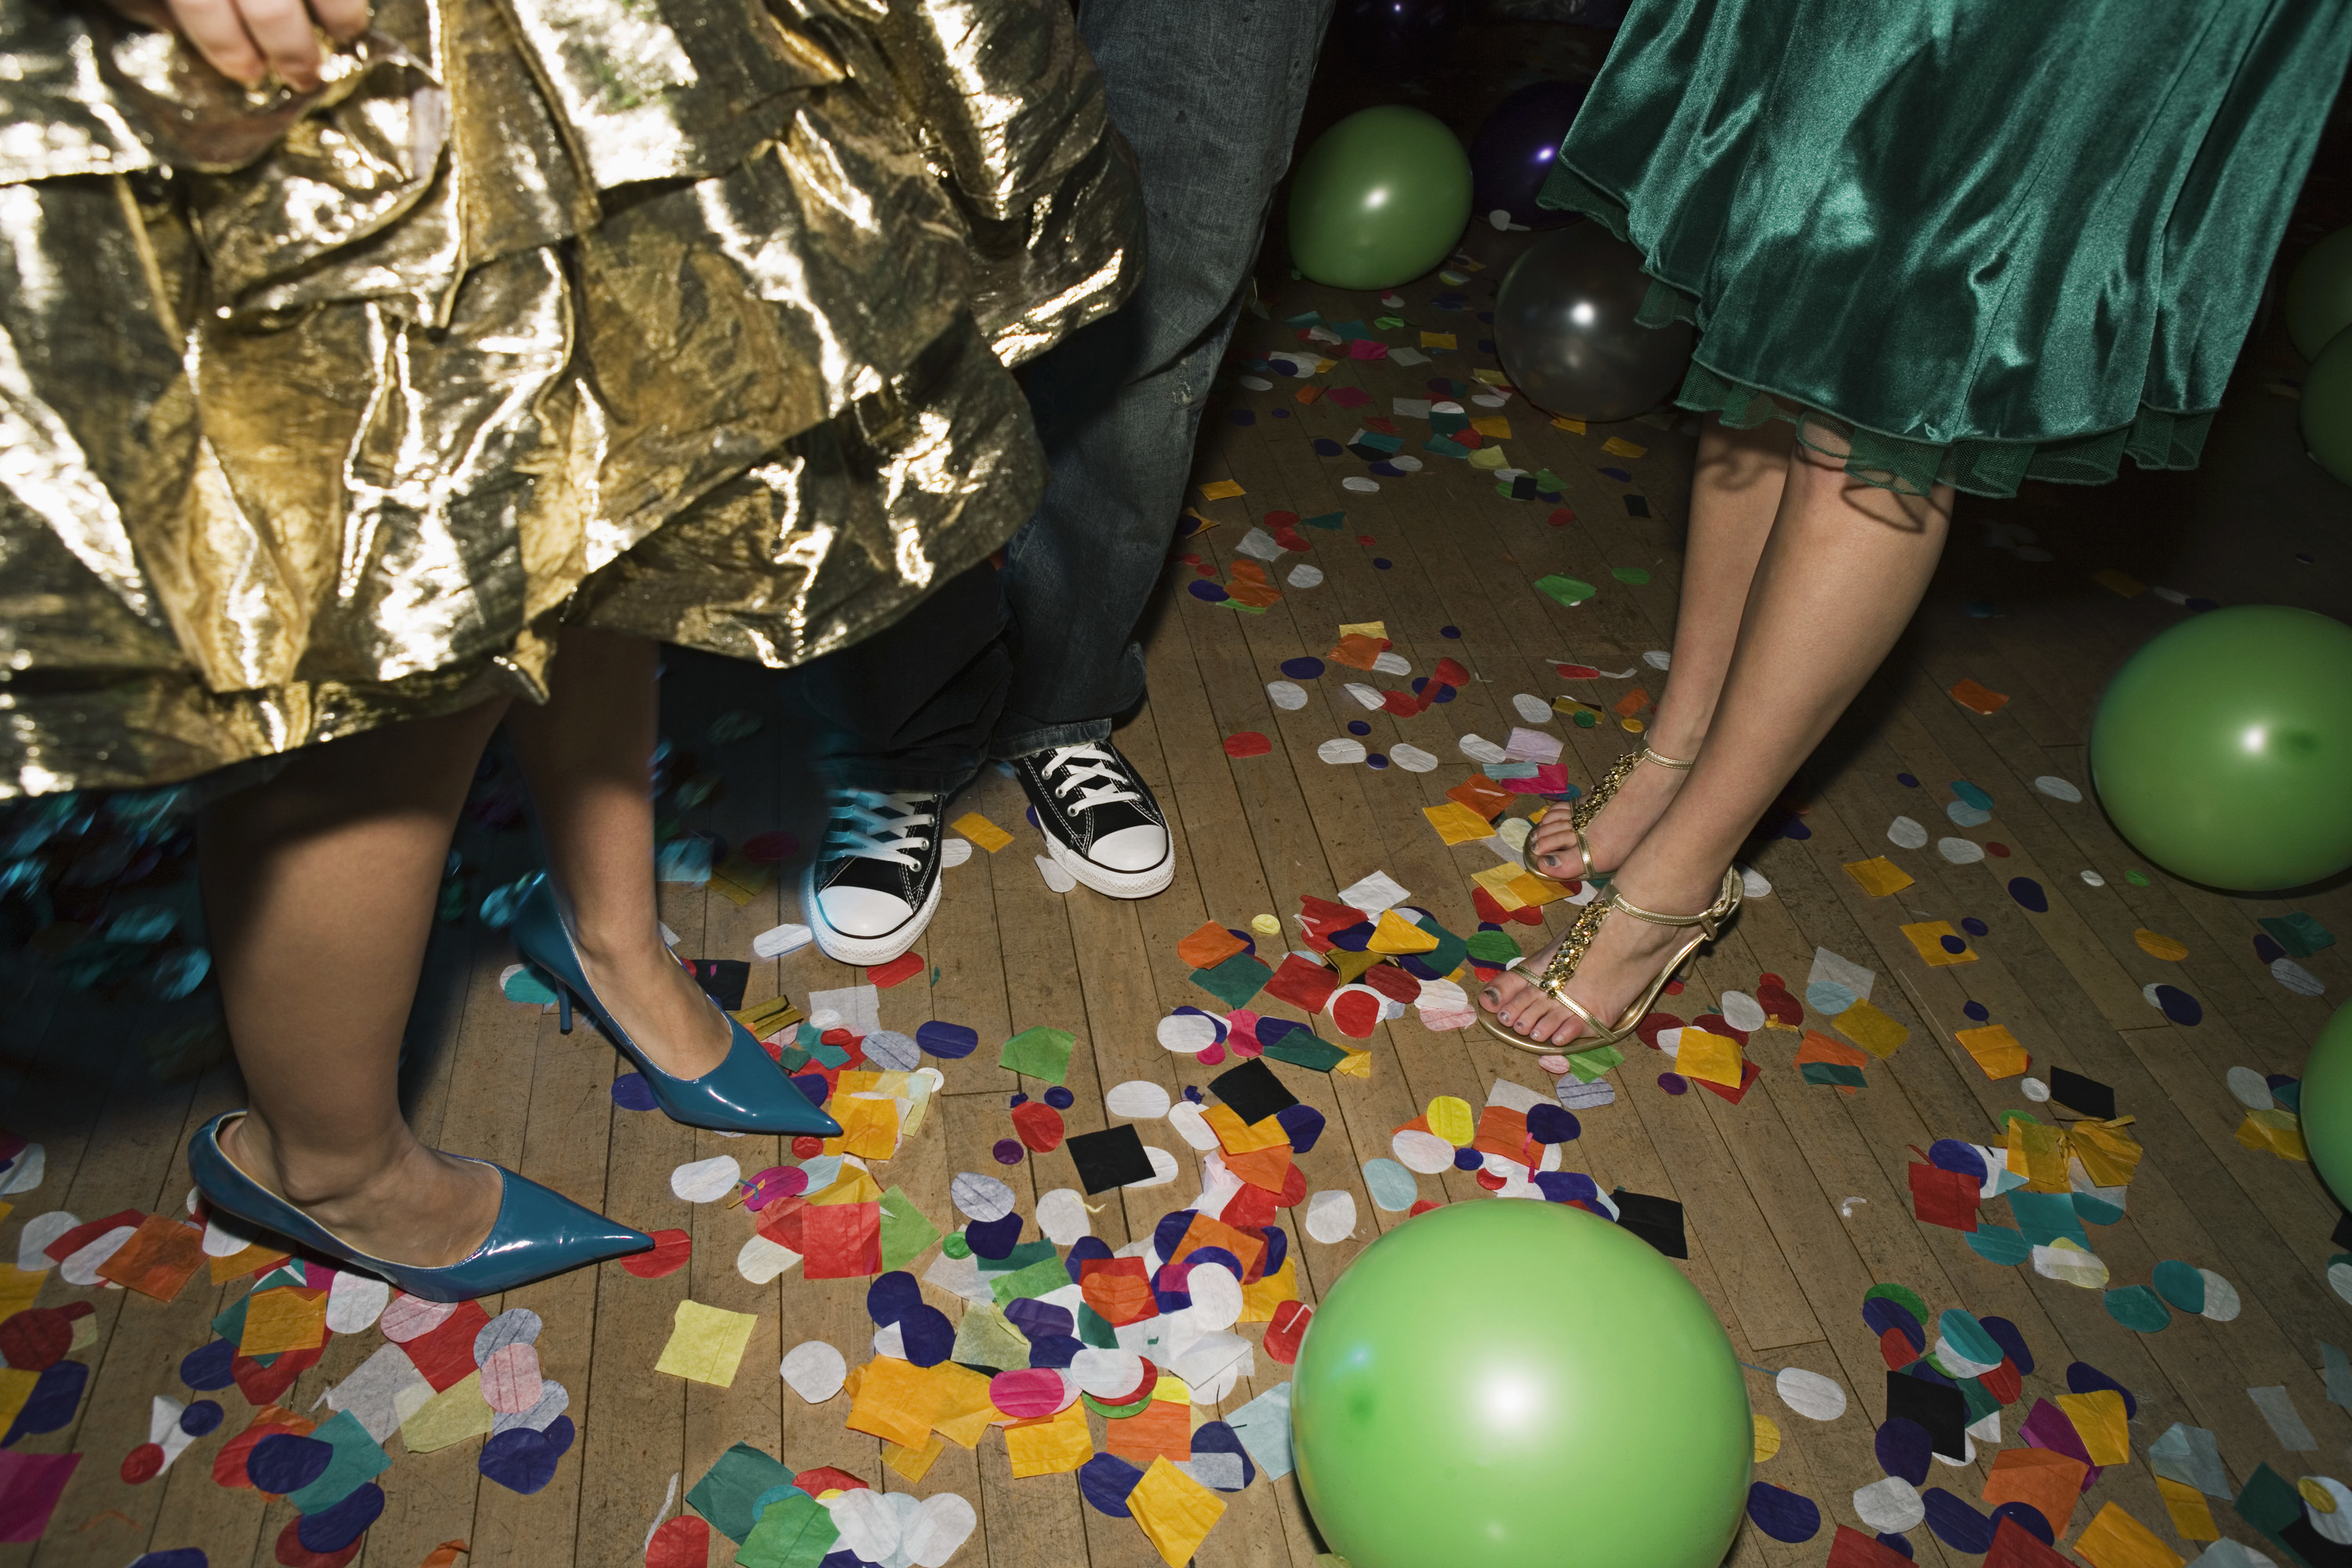 A prom dance floor with confetti and balloons